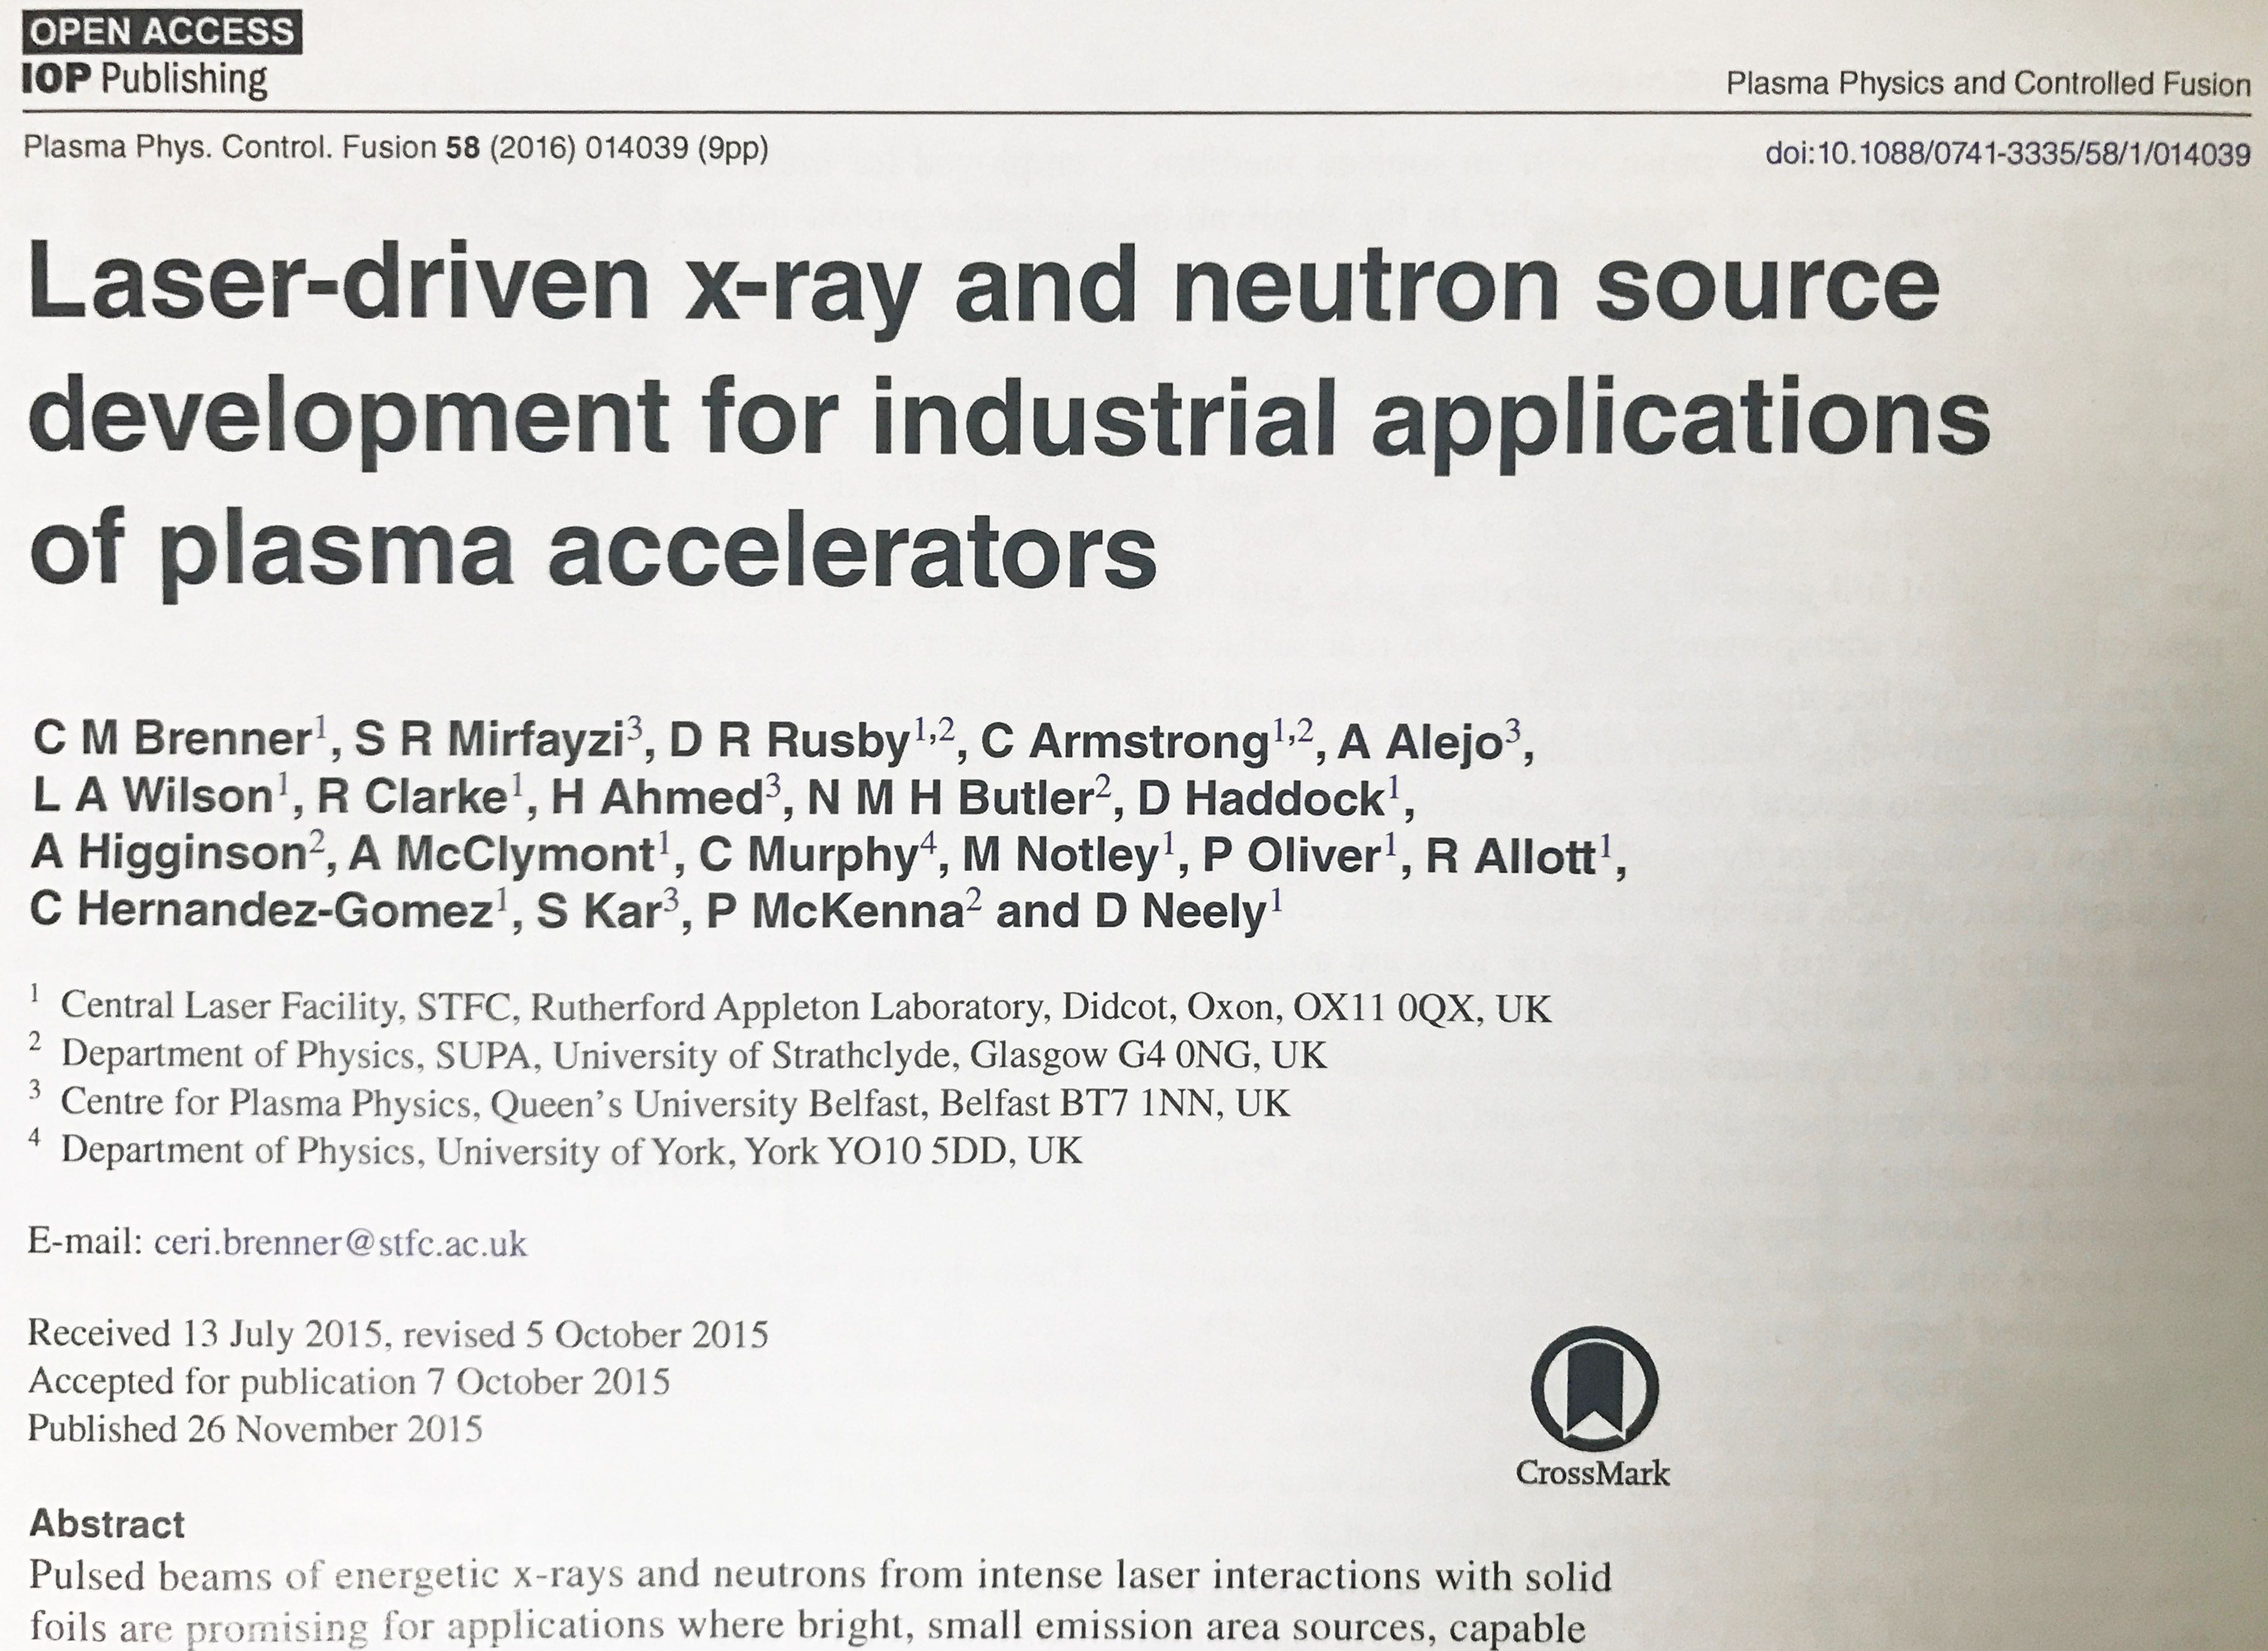 Laser-driven x-ray and neutron source development for industrial applications of plasma accelerators